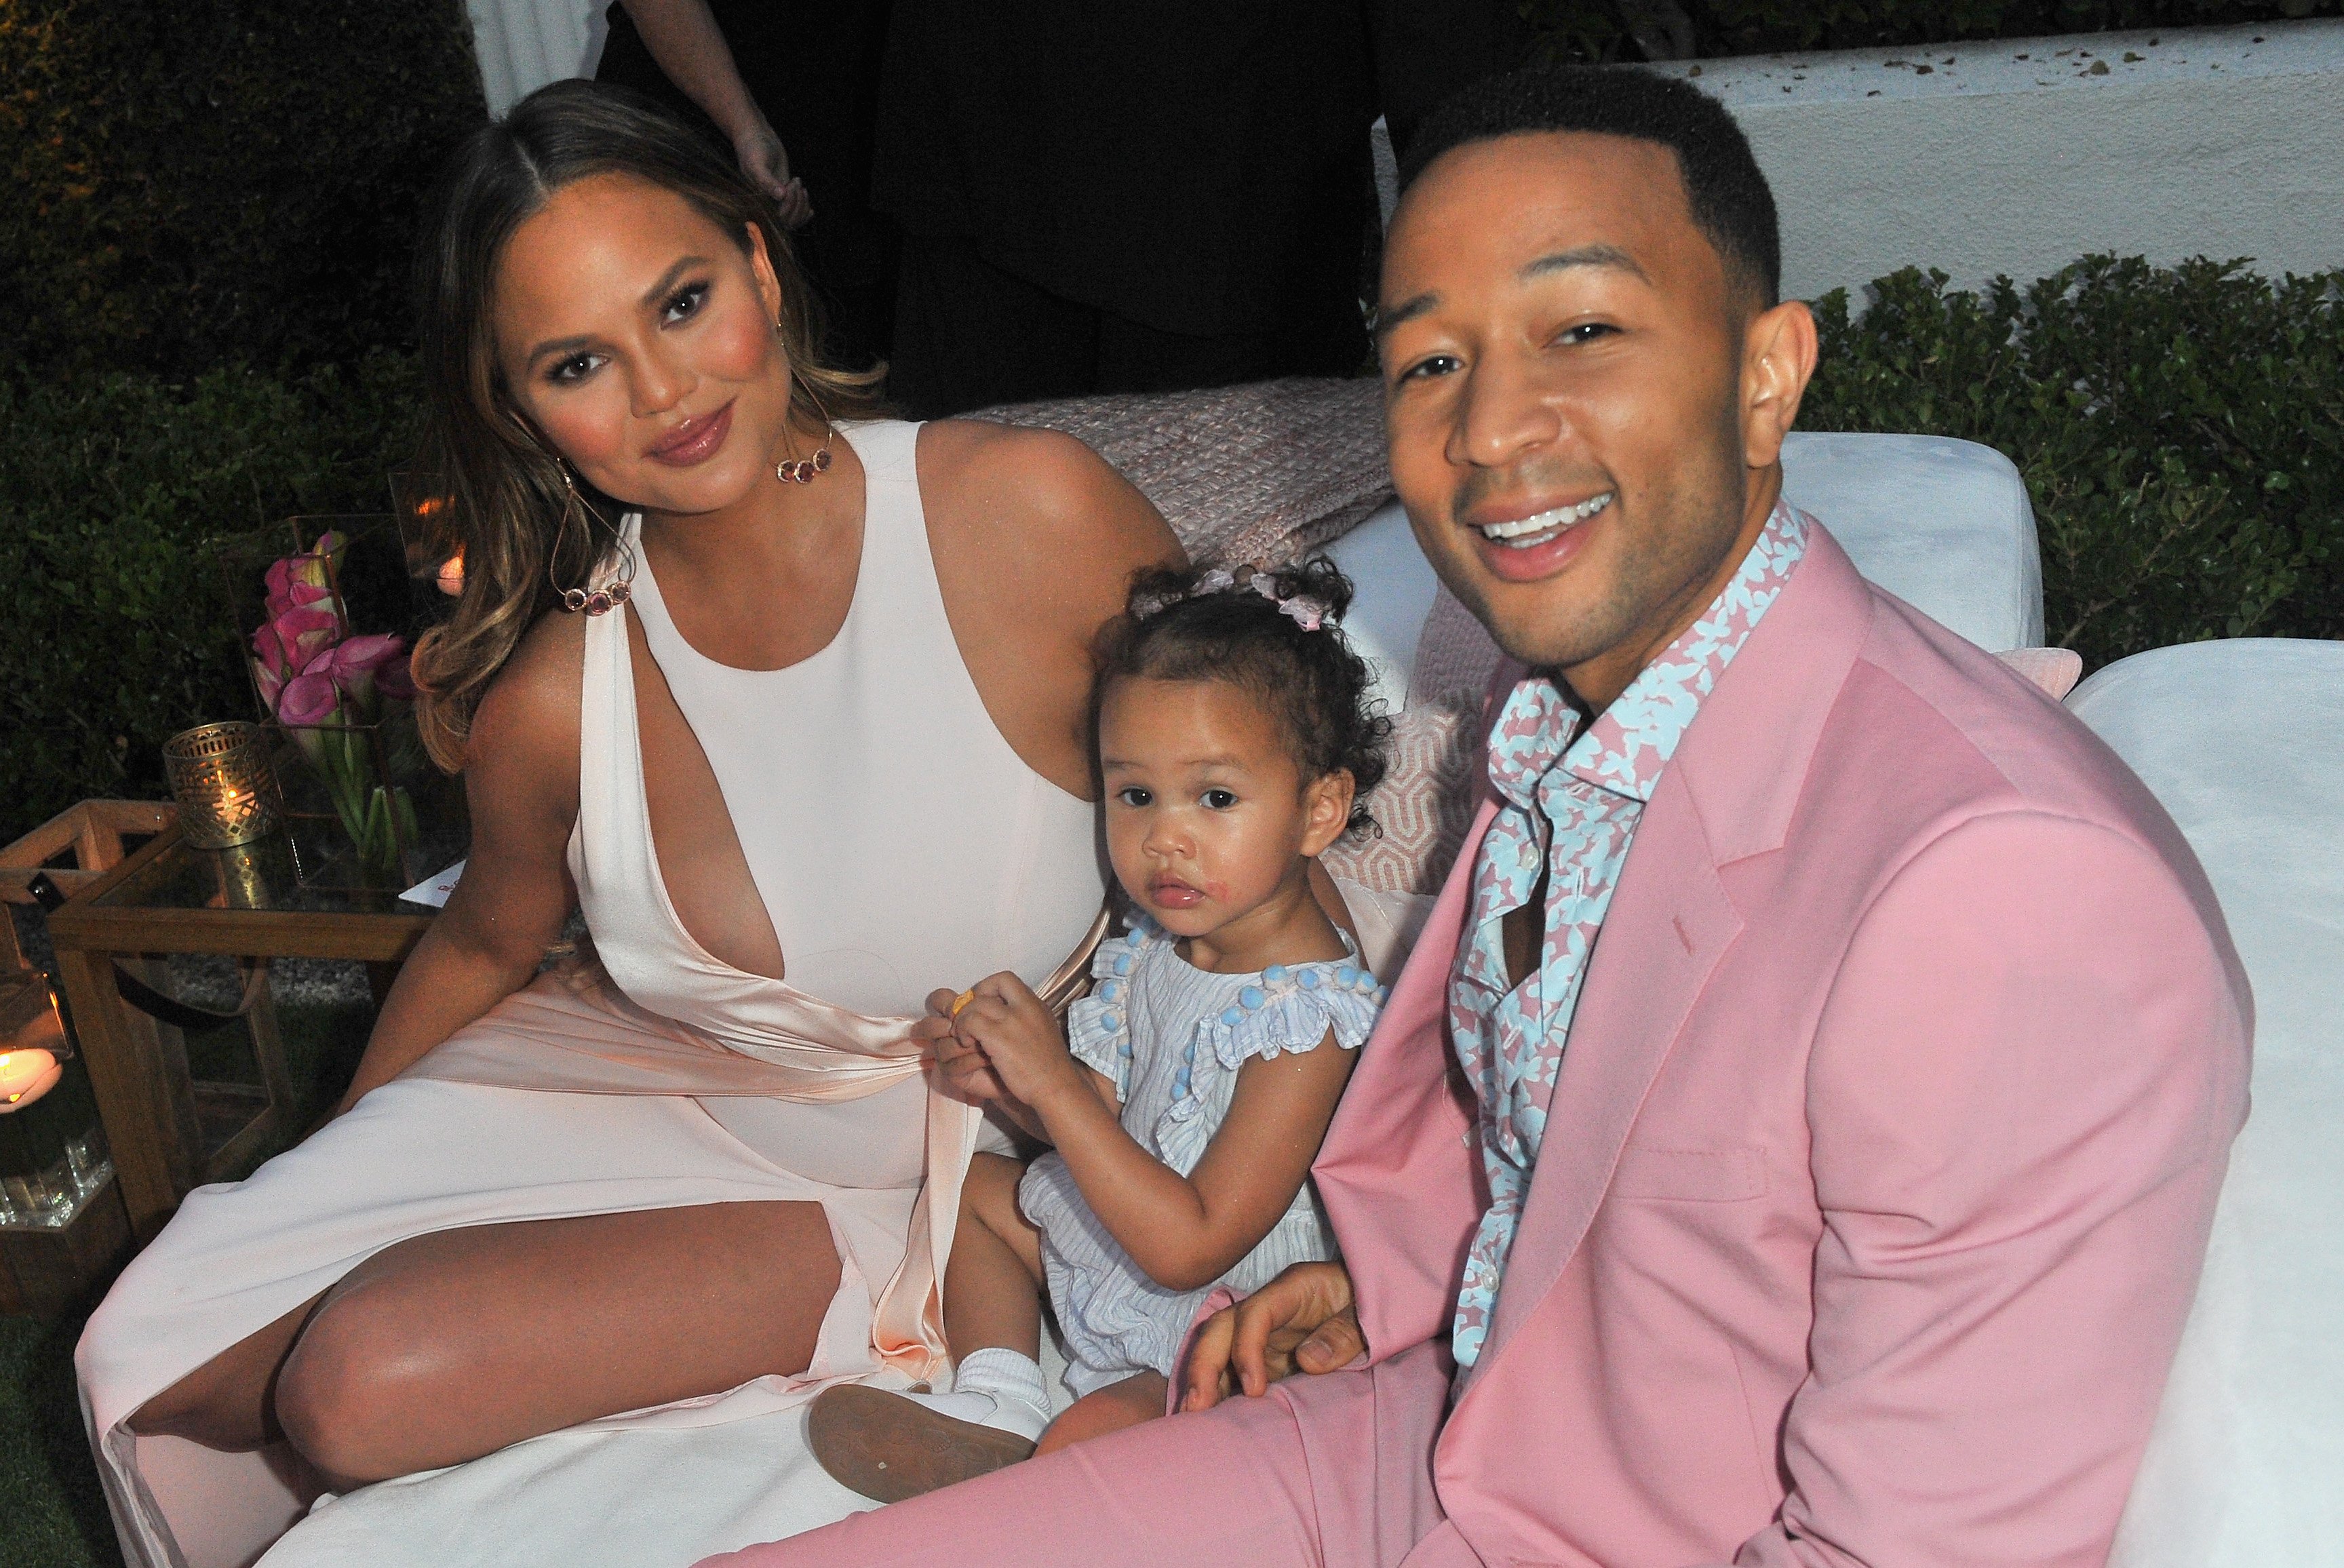 Chrissy Teigen, Luna Simone Stephens and John Legend attend John Legend's launch of his new rose wine brand, LVE, during an intimate Airbnb Concert on June 21, 2018 in Beverly Hills, California | Photo: GettyImages